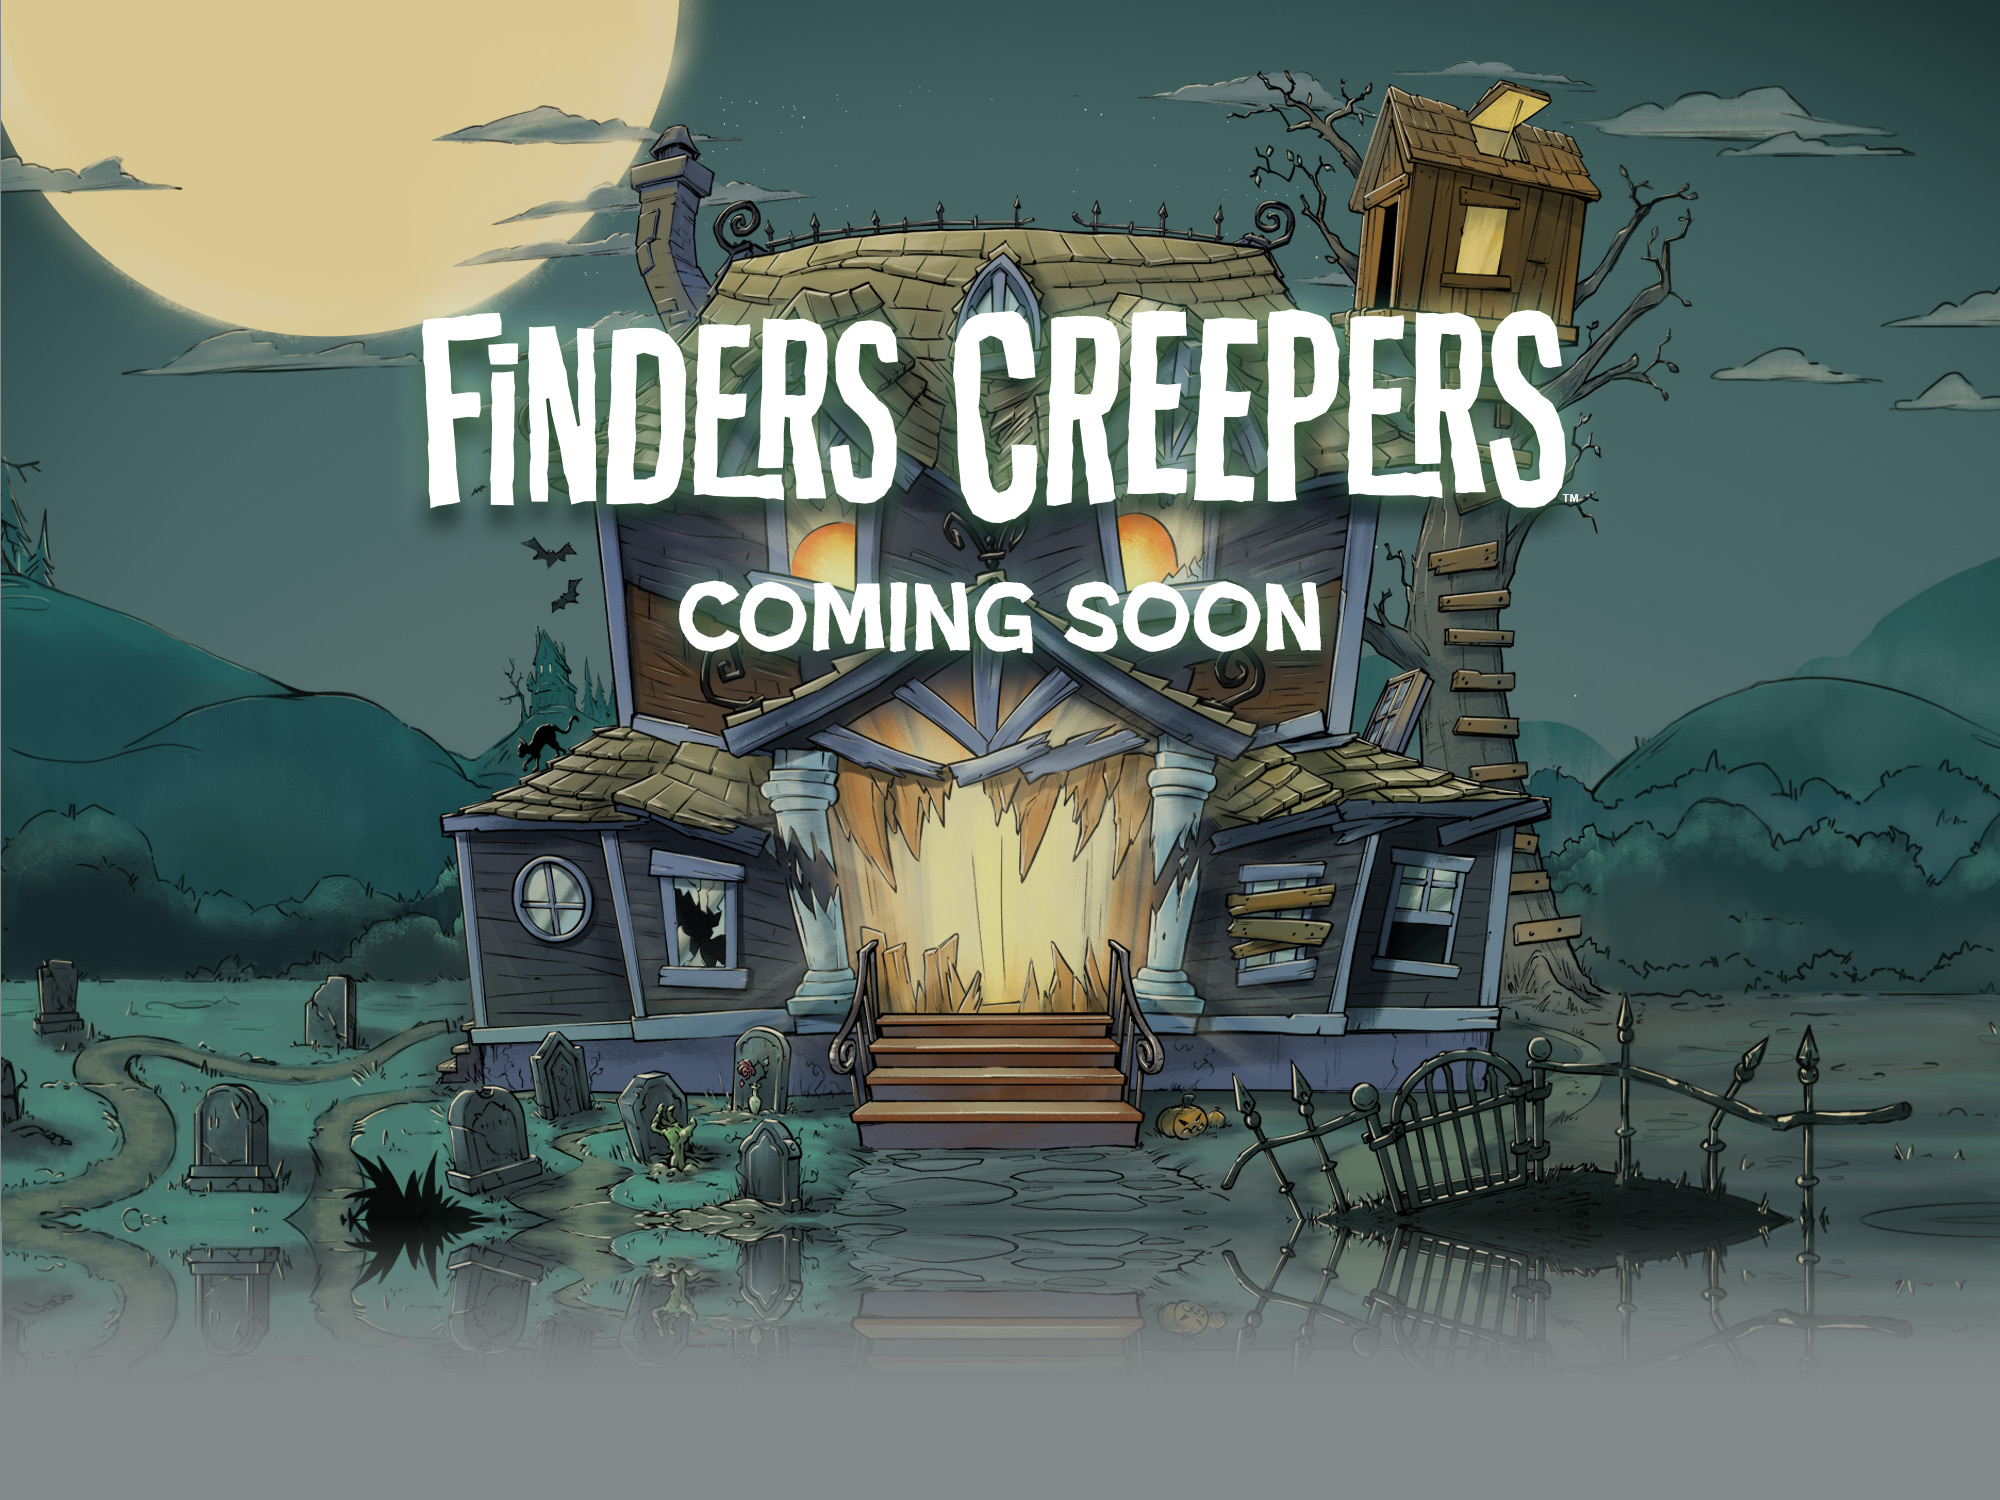 Finders Creepers Coming Soon!